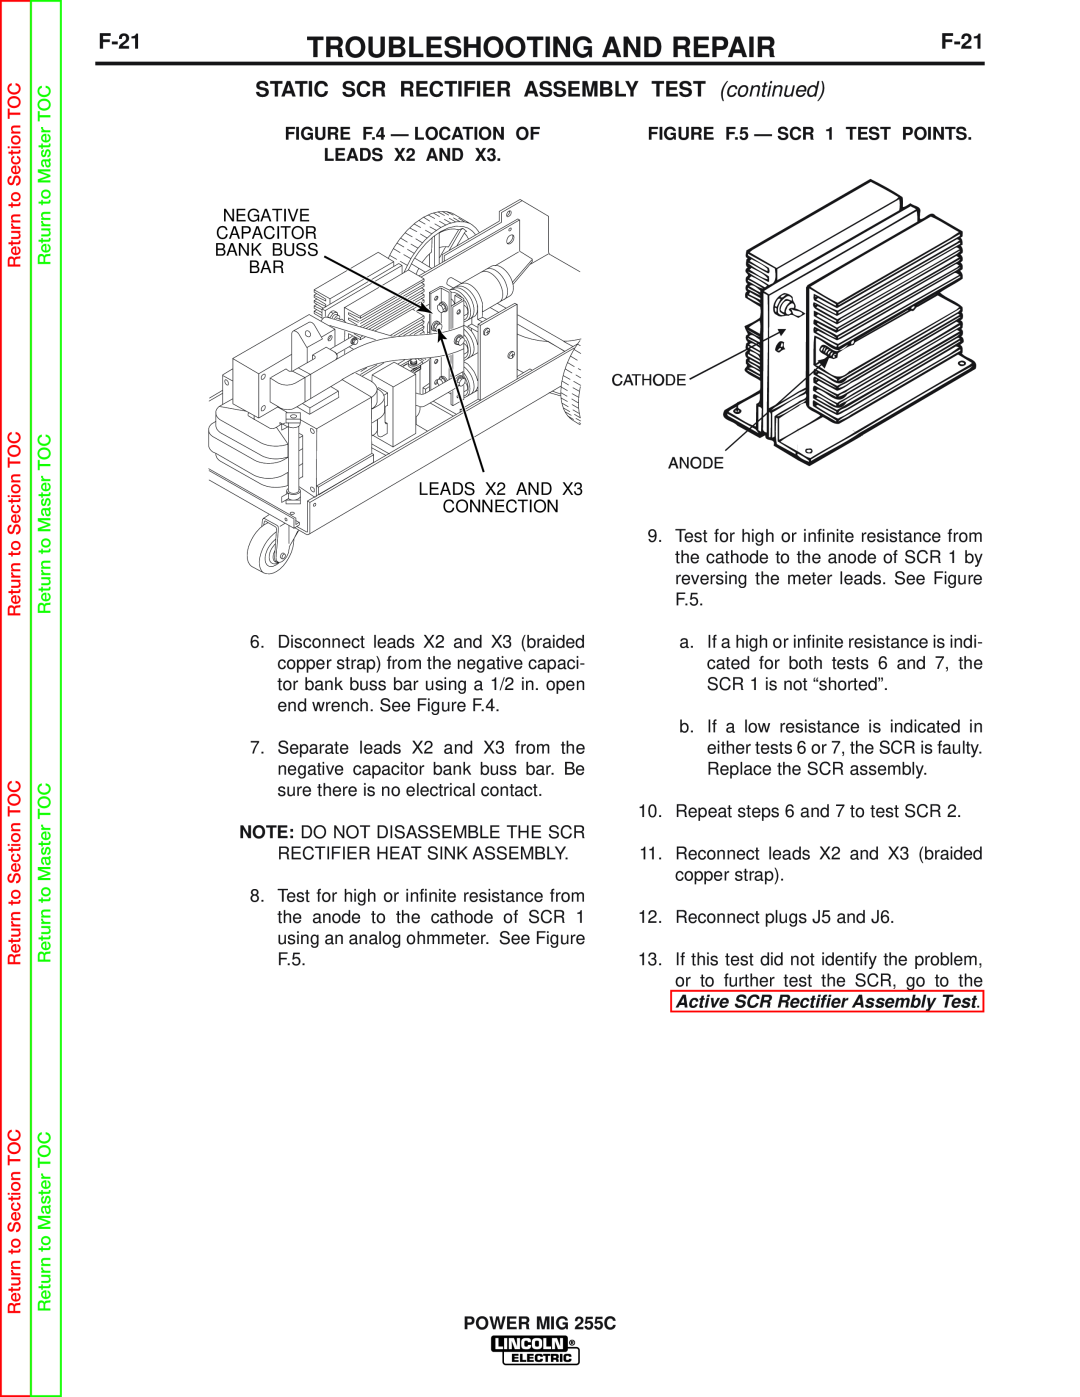 Lincoln Electric SVM170-A service manual F-21, Troubleshooting And Repair, STATIC SCR RECTIFIER ASSEMBLY TEST continued 